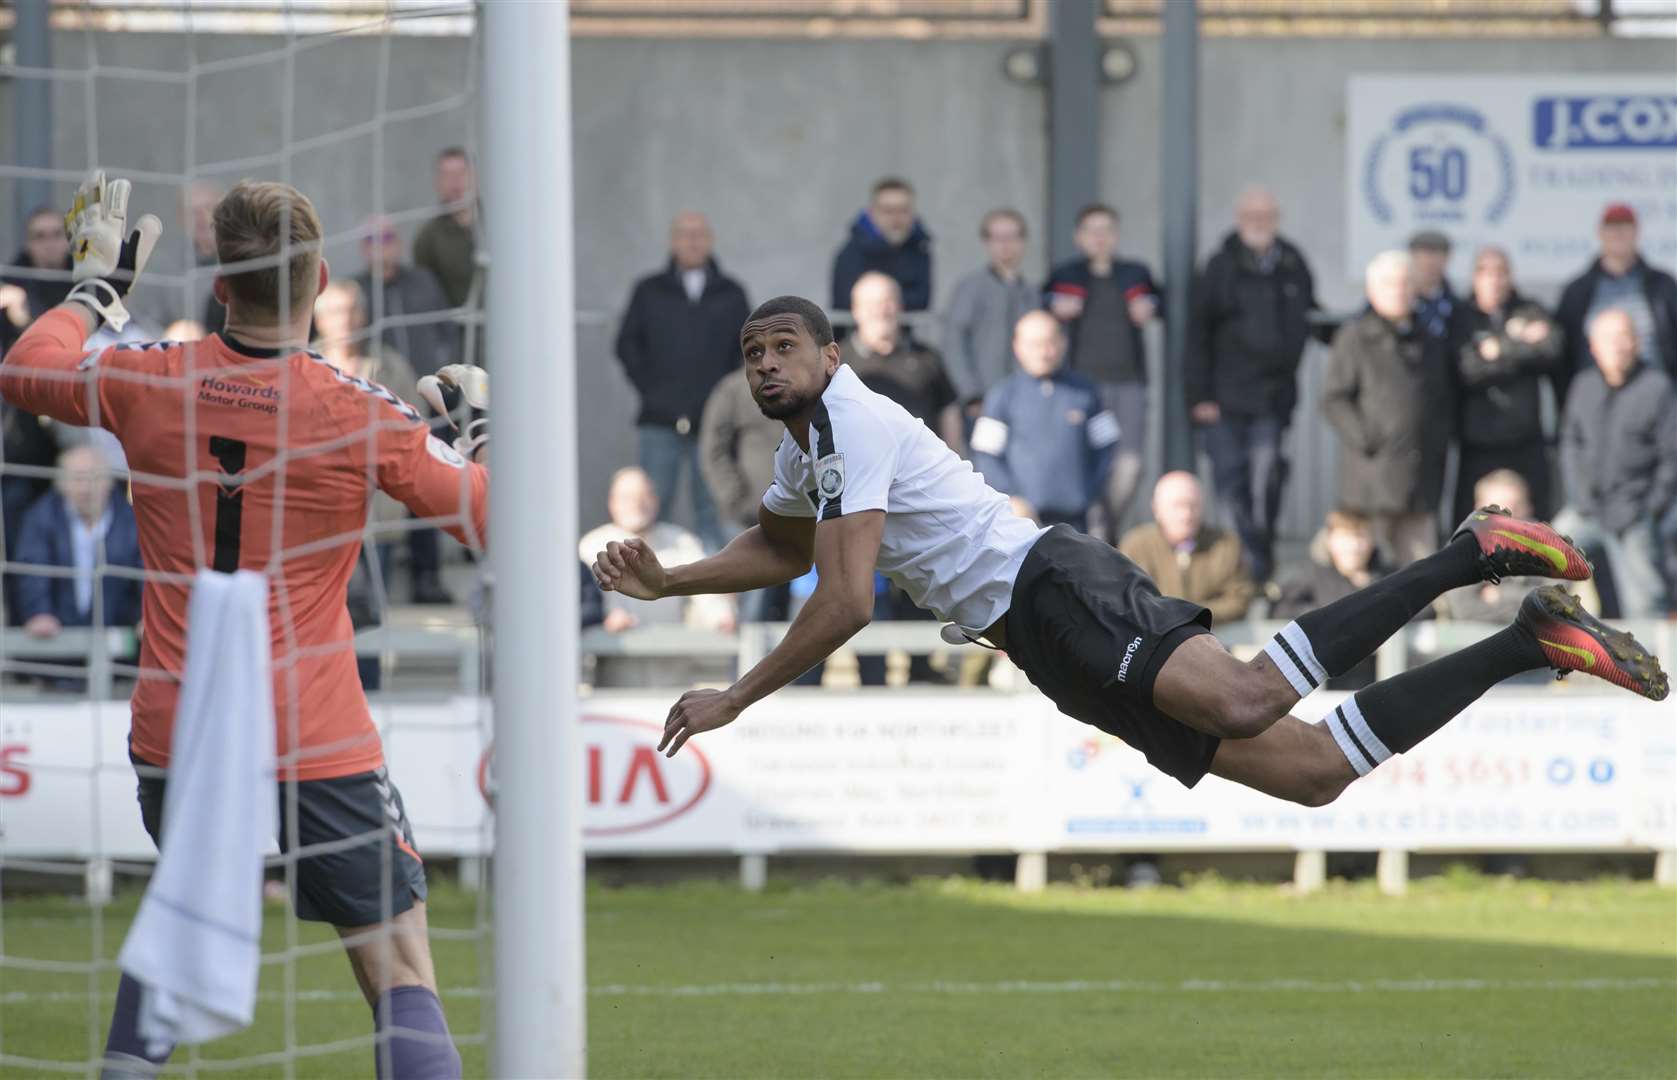 Dartford substitute Danny Mills heads over late on against Weston. Picture: Andy Payton